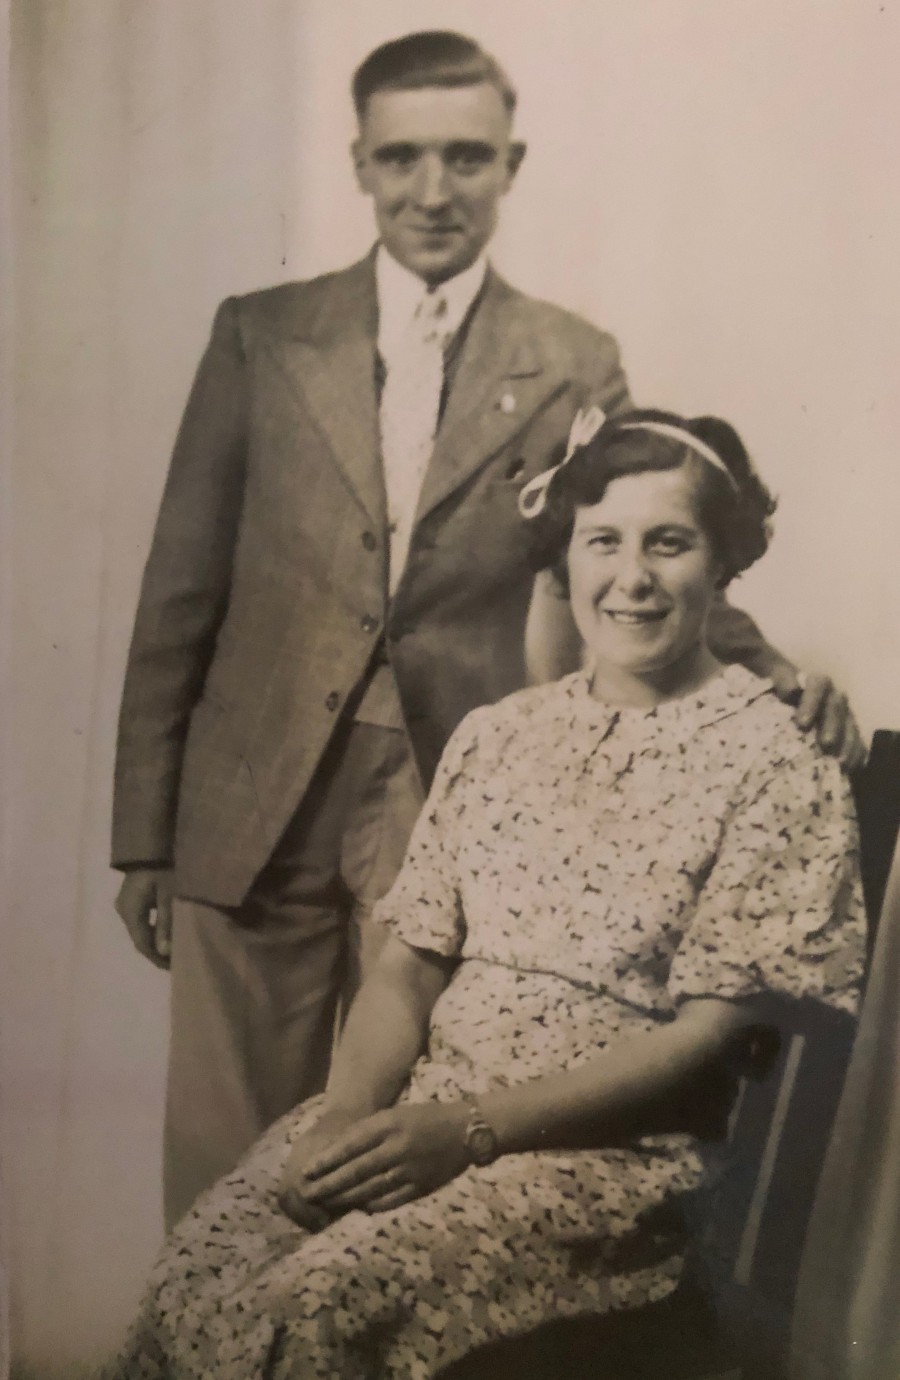 Ethel Boyd and Harold Pavey. They married on the 28.9.1935.